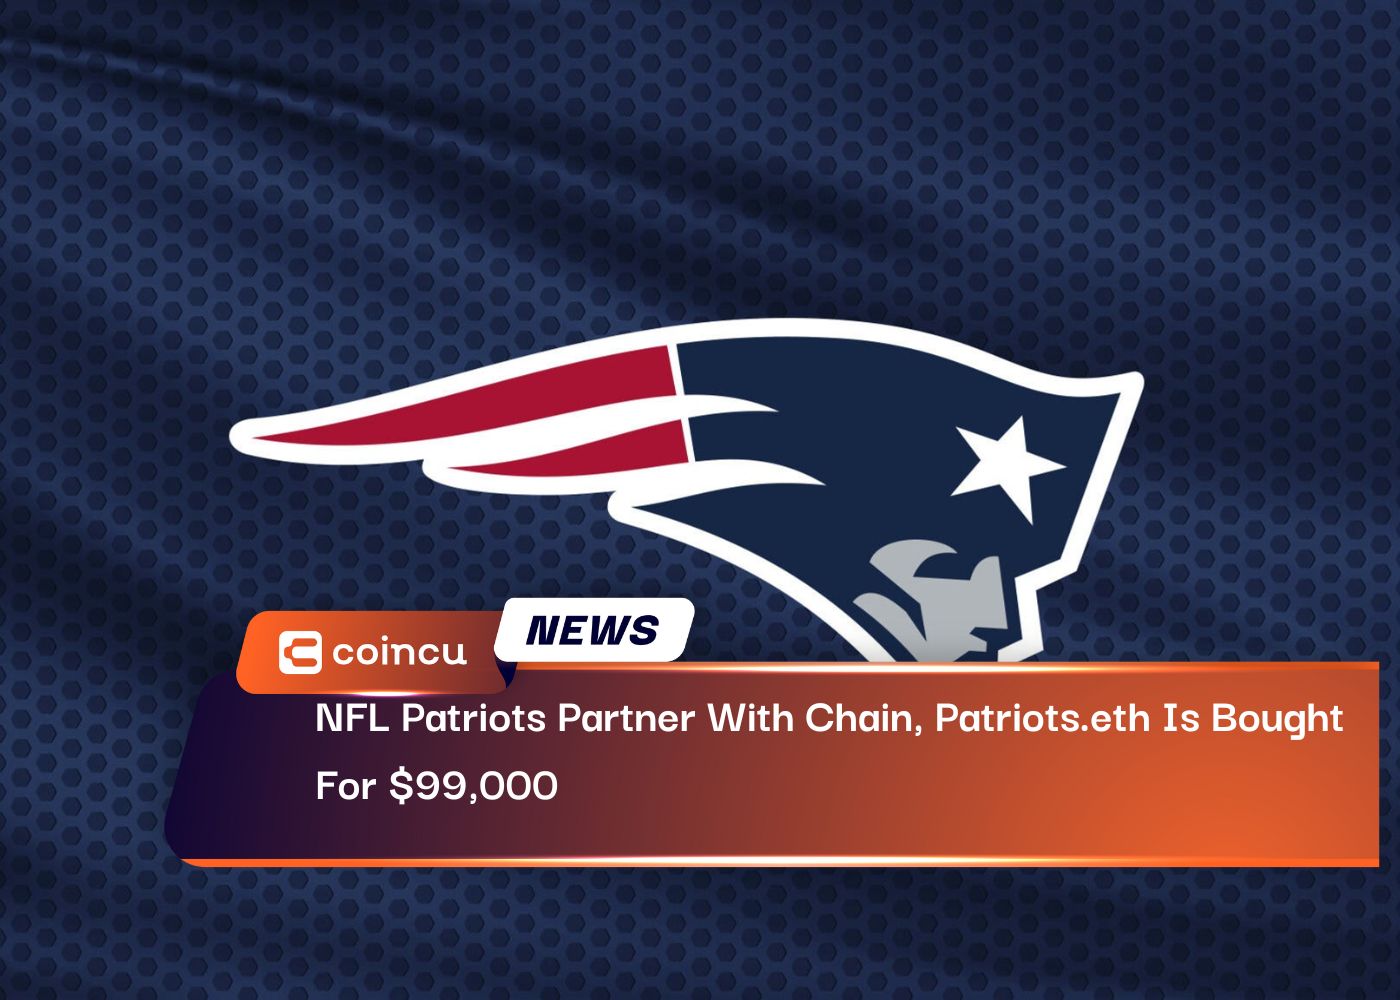 NFL Patriots Partner With Chain